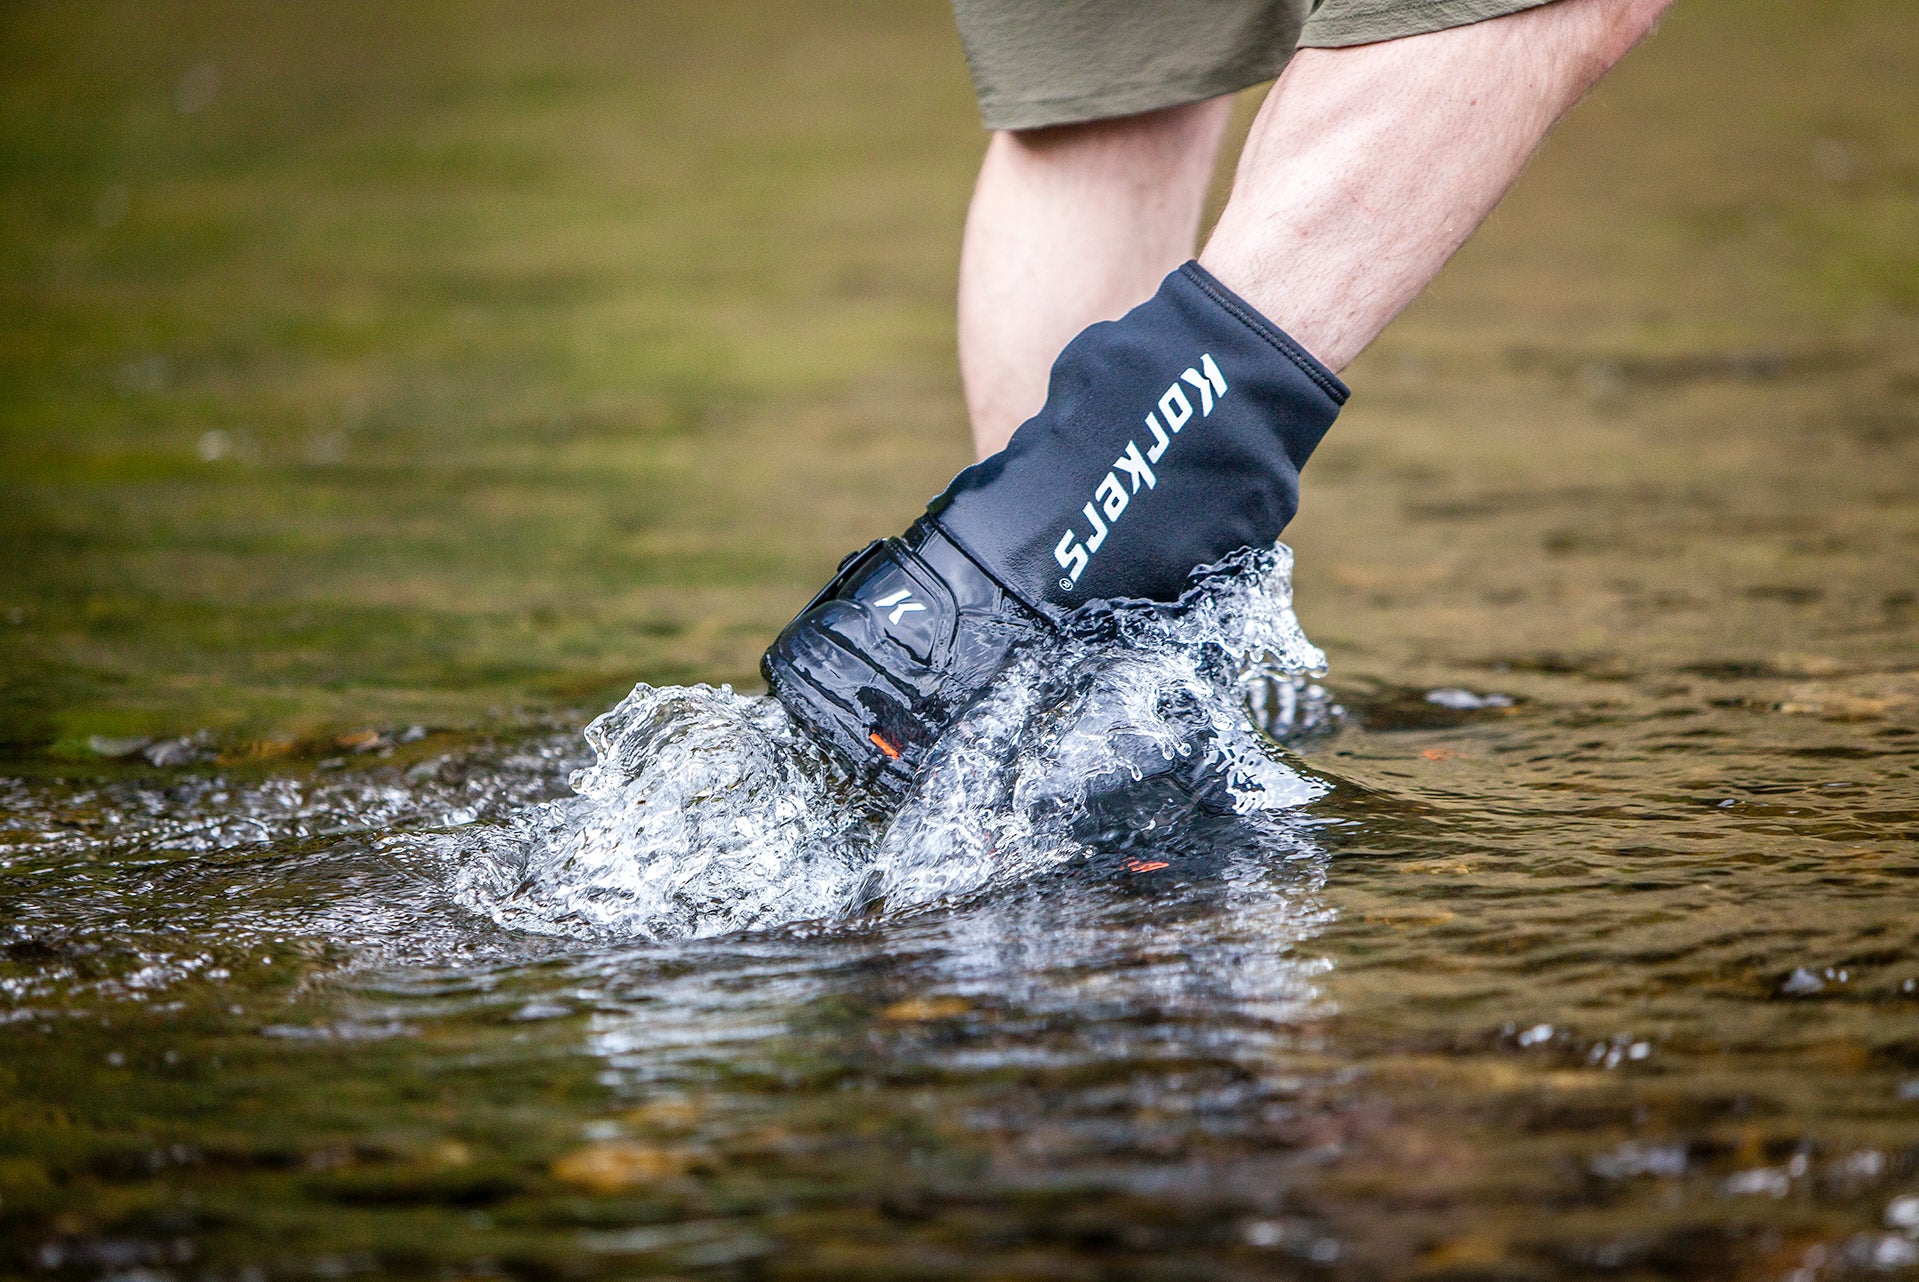 Here's how to get a free pair of korkers idrain wading socks!